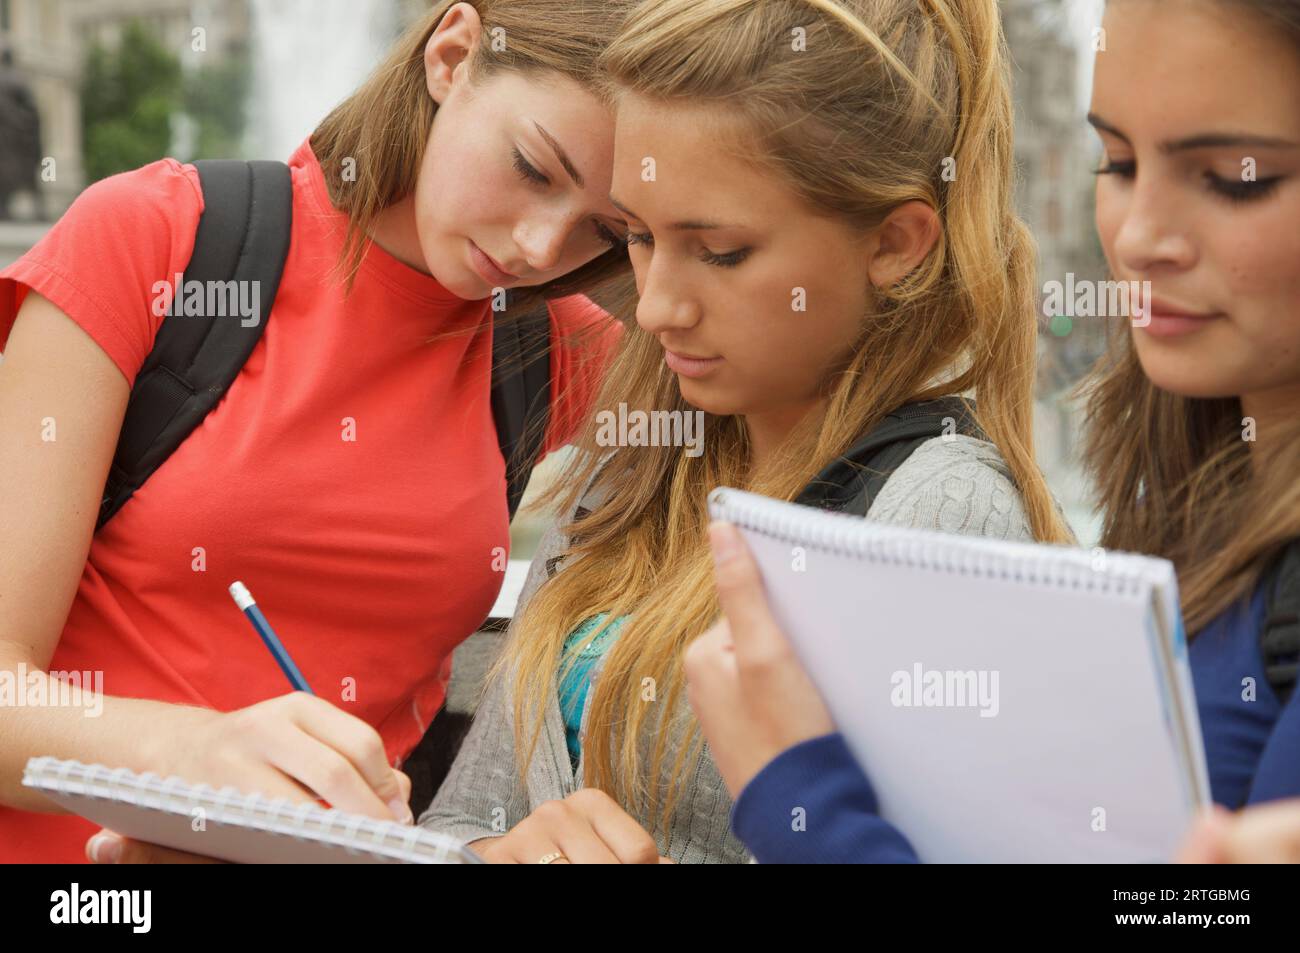 Three teenaged girls reading, writing and holding note pads Stock Photo